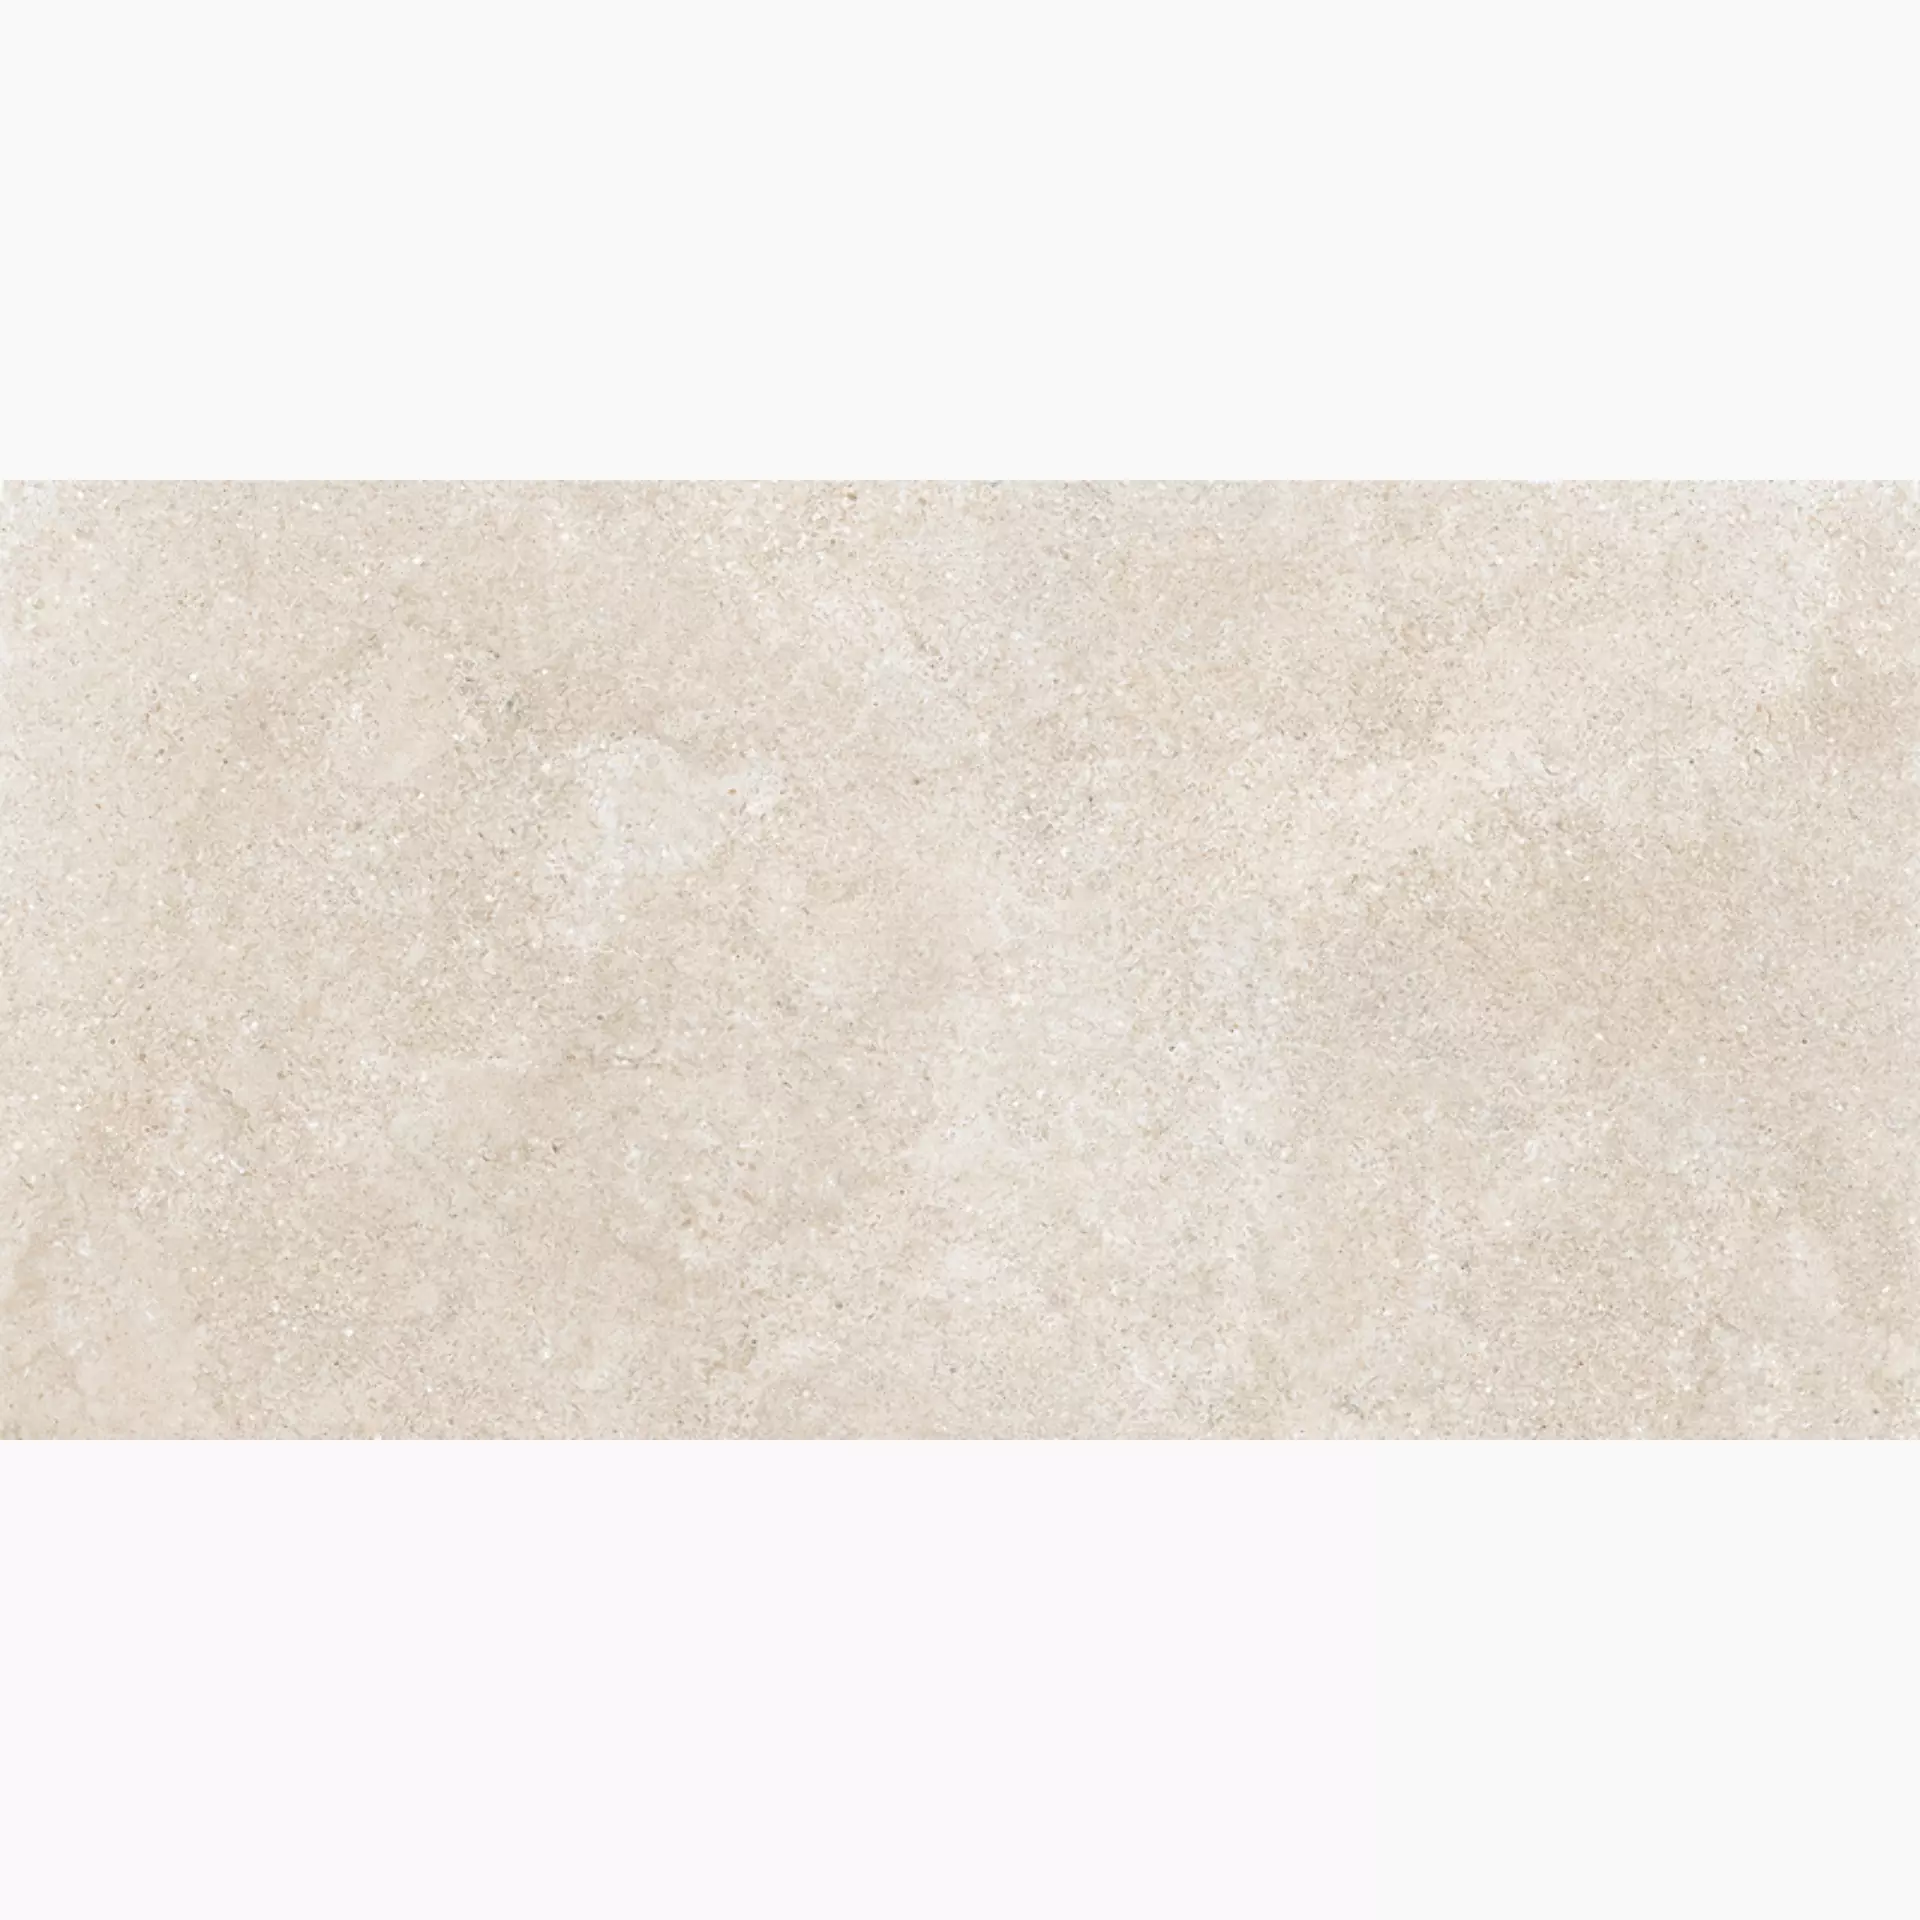 Keope Brystone Ivory Strutturato 44593344 60x120cm rectified 9mm